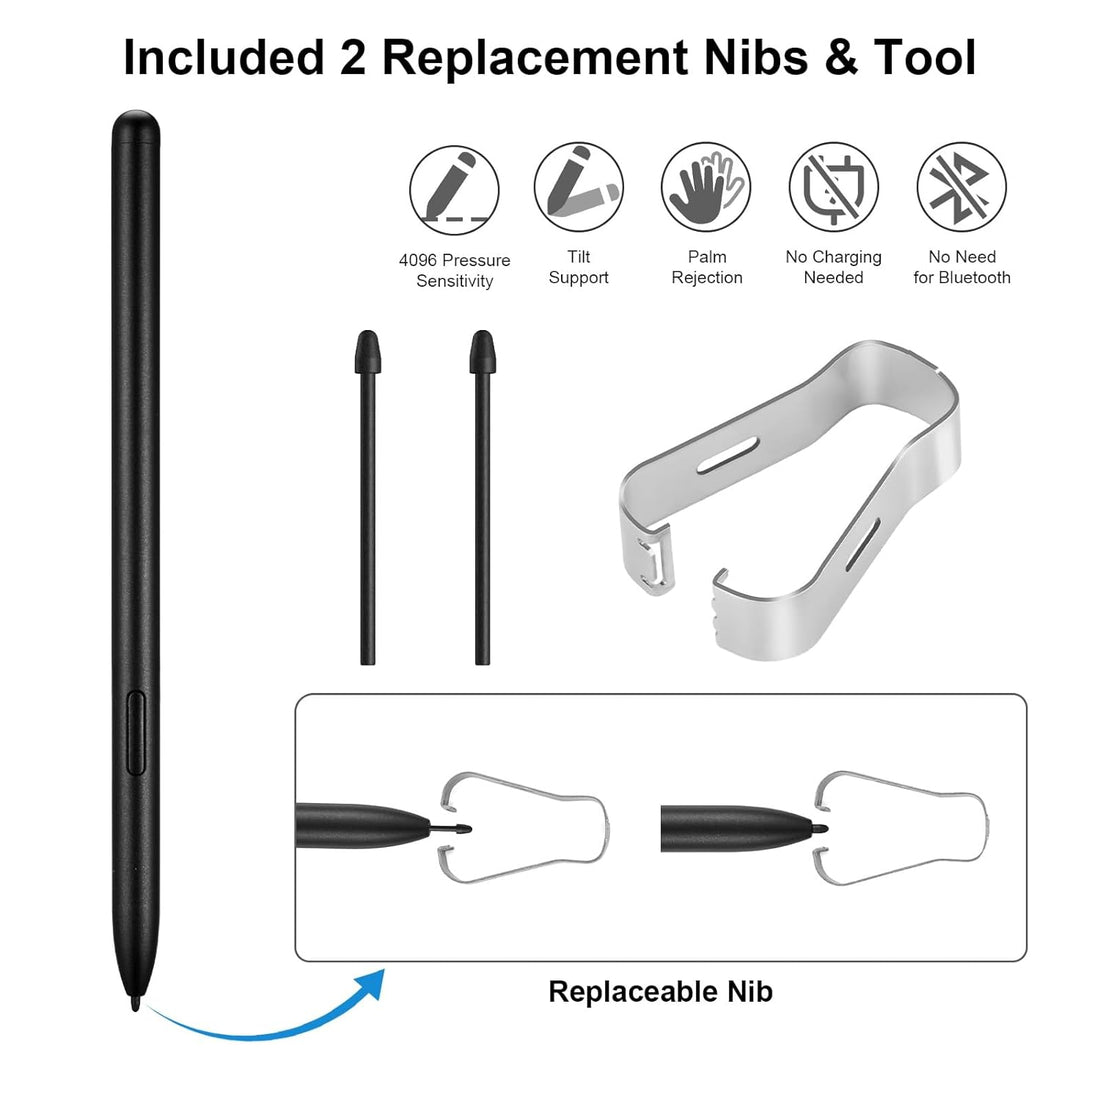 Remarkble 2 Pen with 2 Nibs Replacement Set- Digital EMR Stylus Pens,4096 Pressure Level,Palm Rejection Compatible with Remarkable 2 Tablet (Stylus Pens with 2 Nibs)